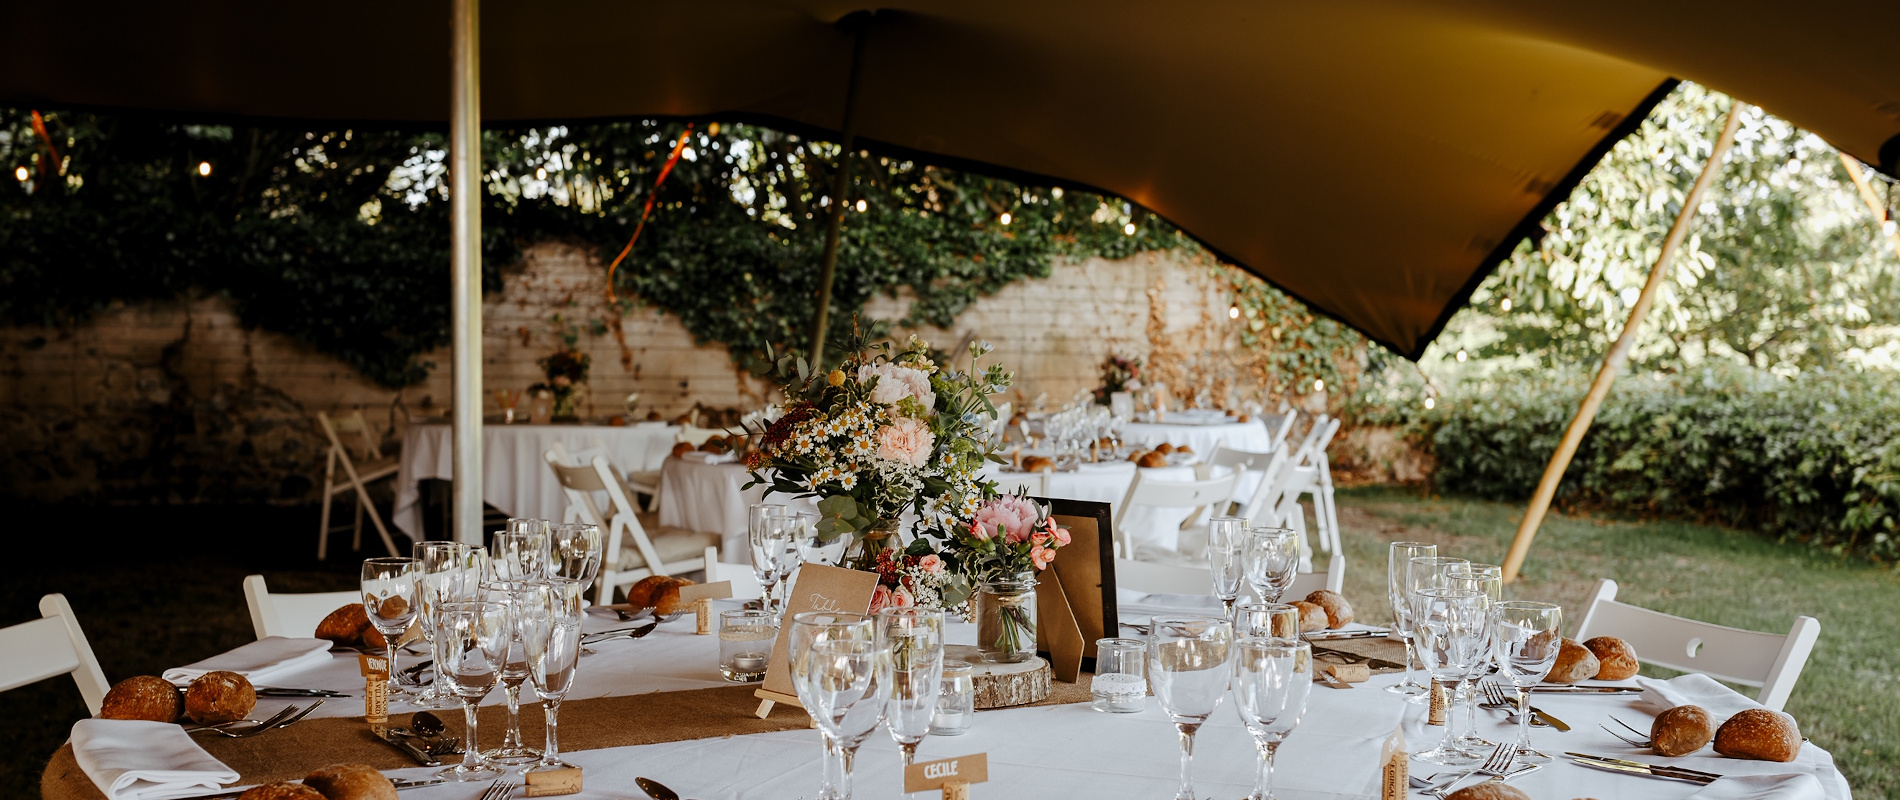 Decorated tables on a wedding day at Château de Bois Rigaud in the south of France